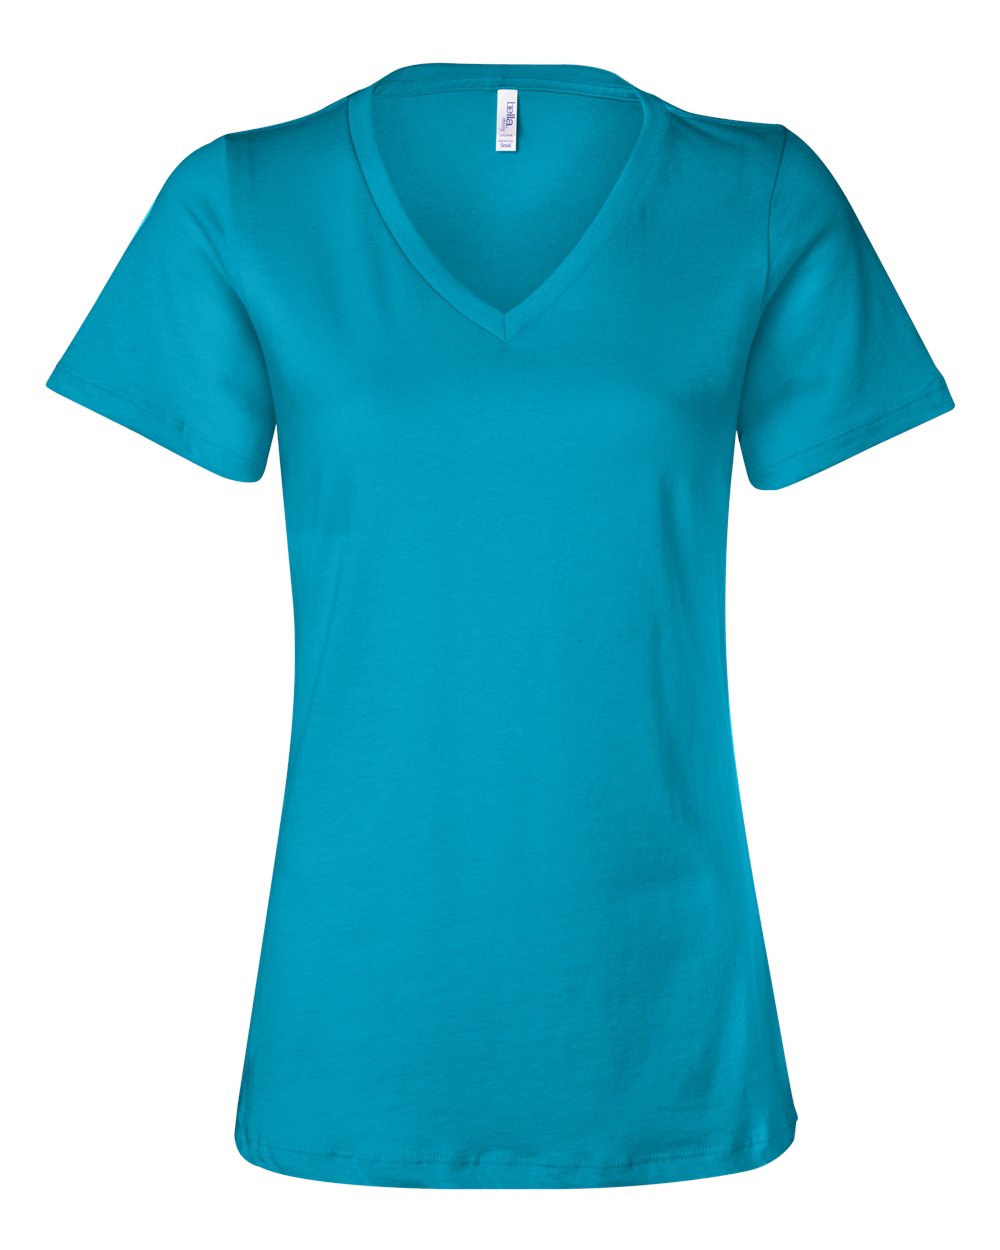 bella+canvas womens relaxed v-neck tee turquoise